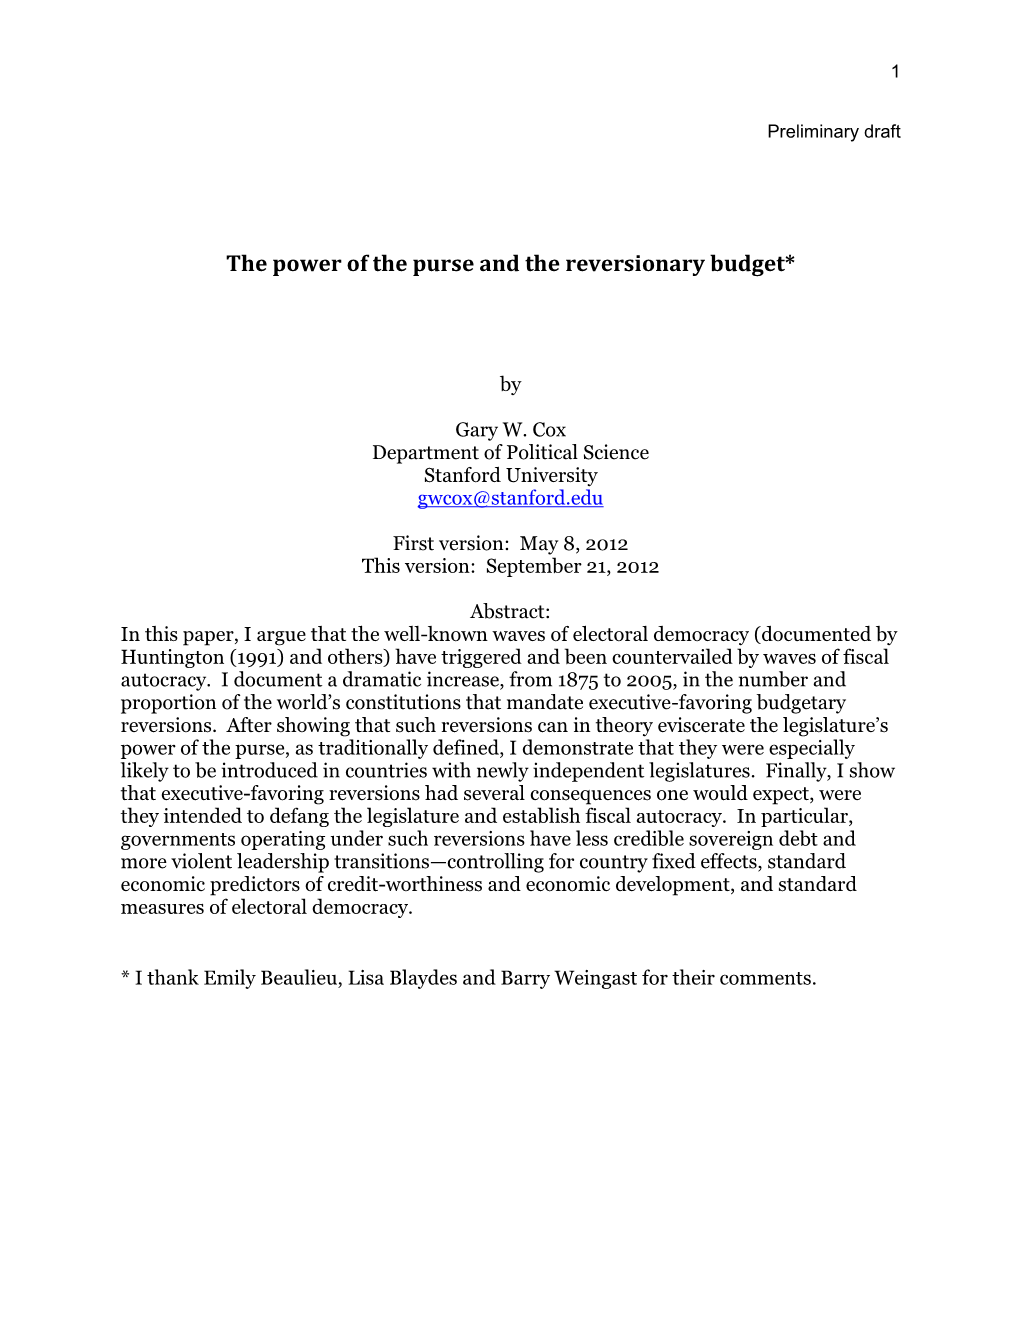 Cox the Power of the Purse and the Reversionary Budget.Pdf